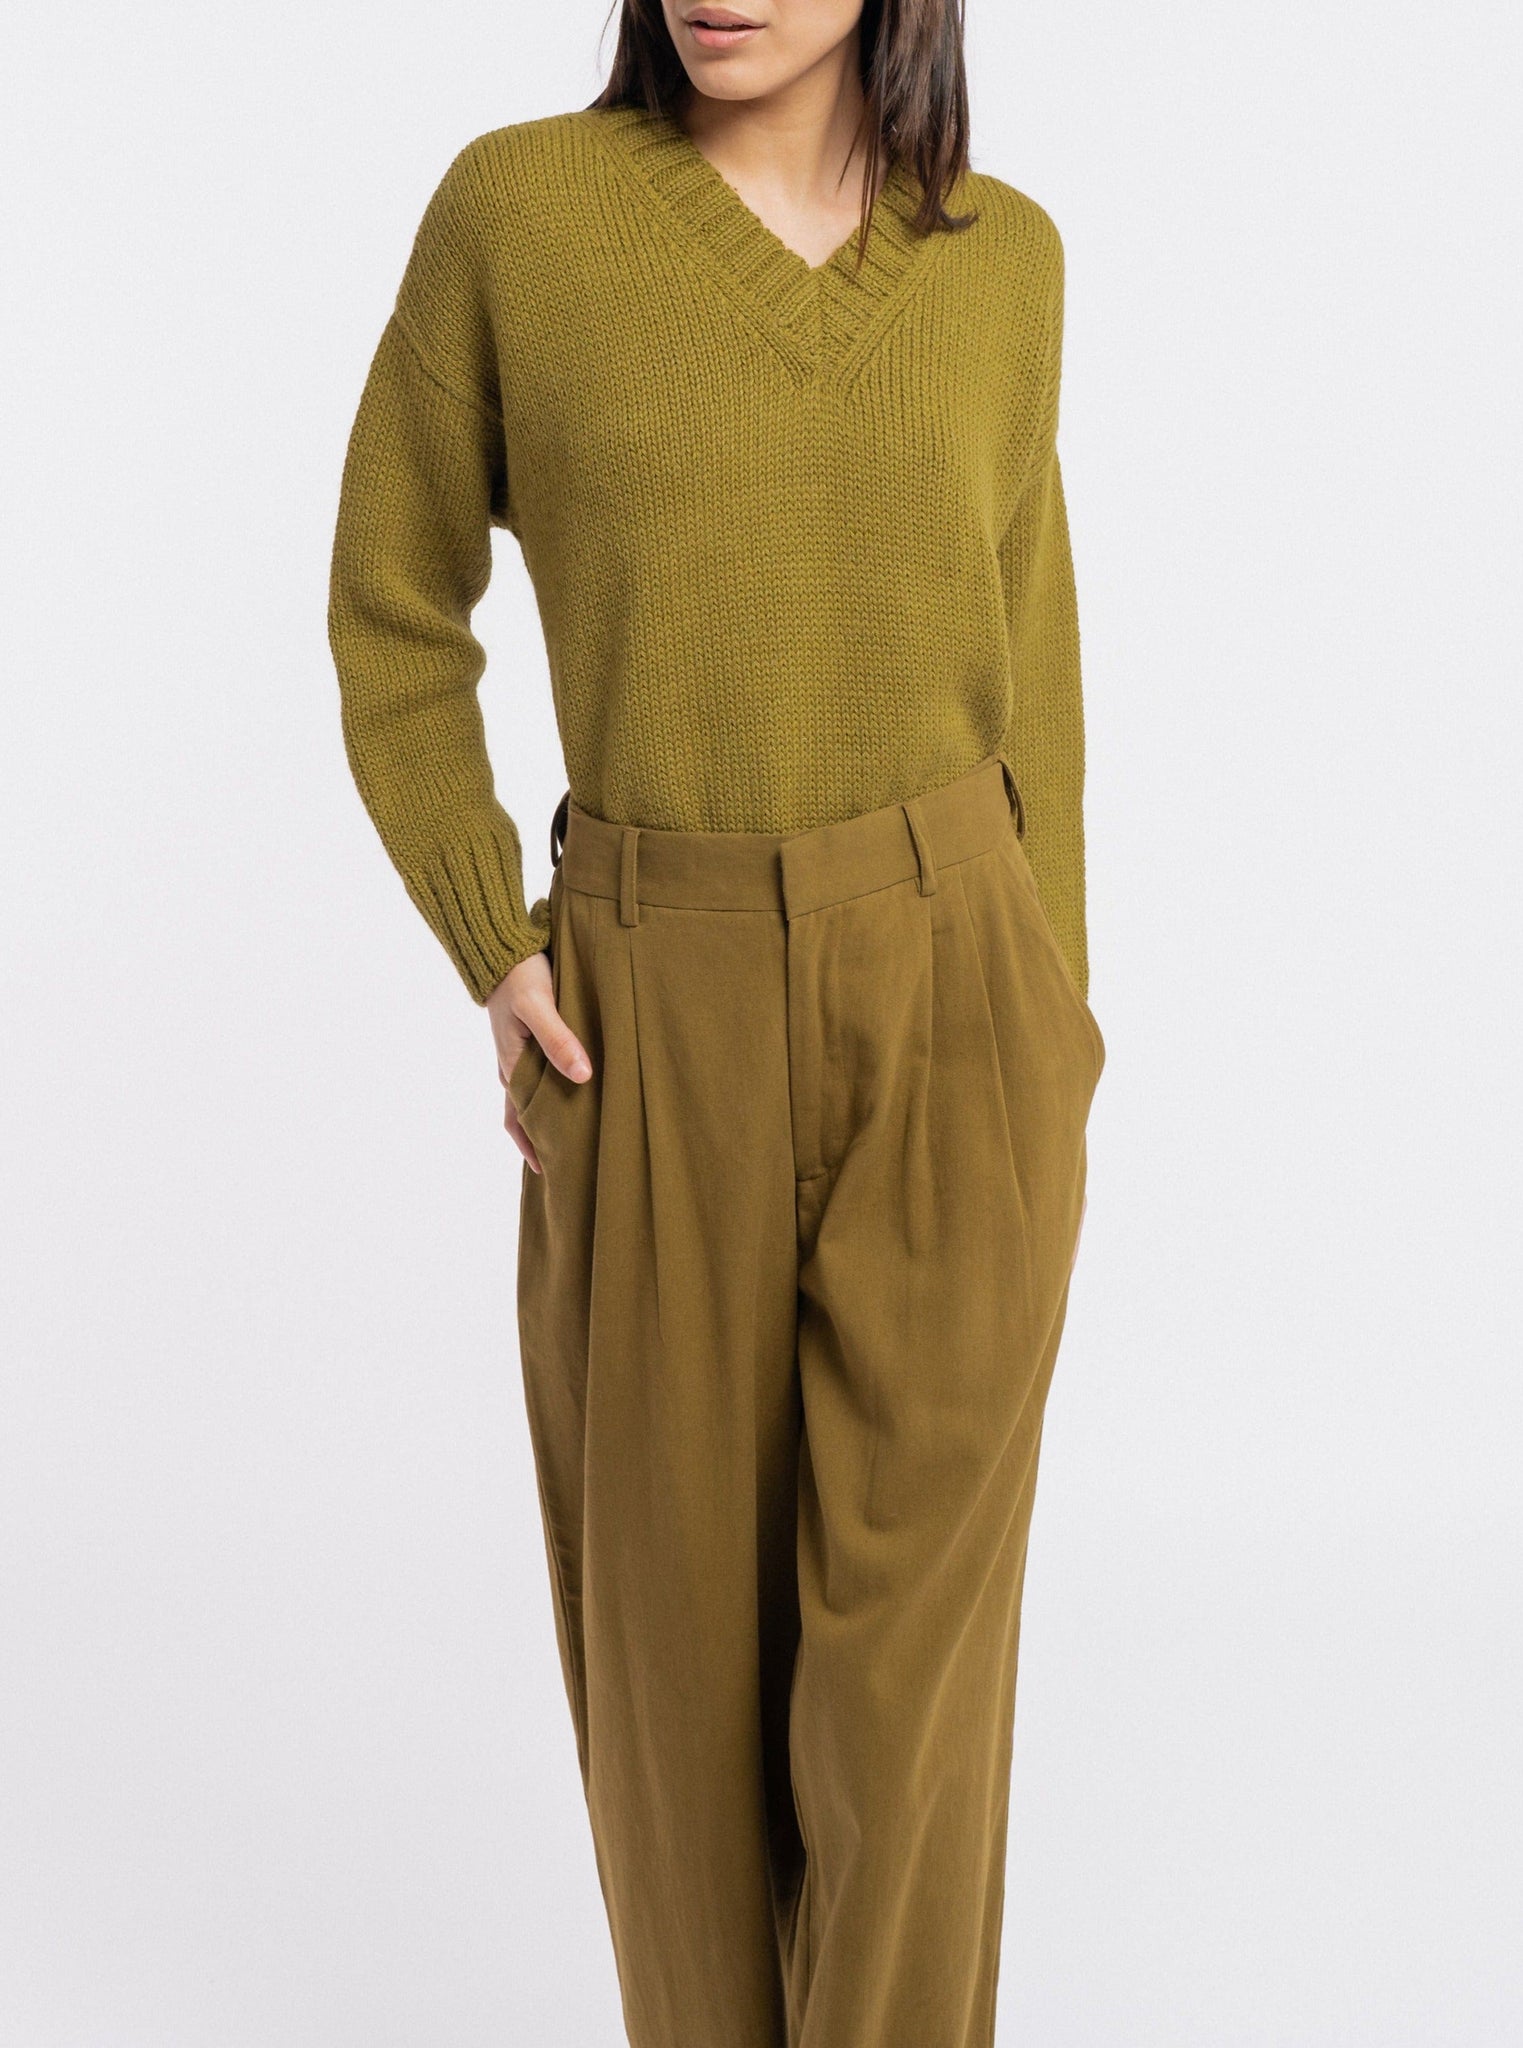 The model is wearing comfortable wide leg Alfred Trouser - Olive.